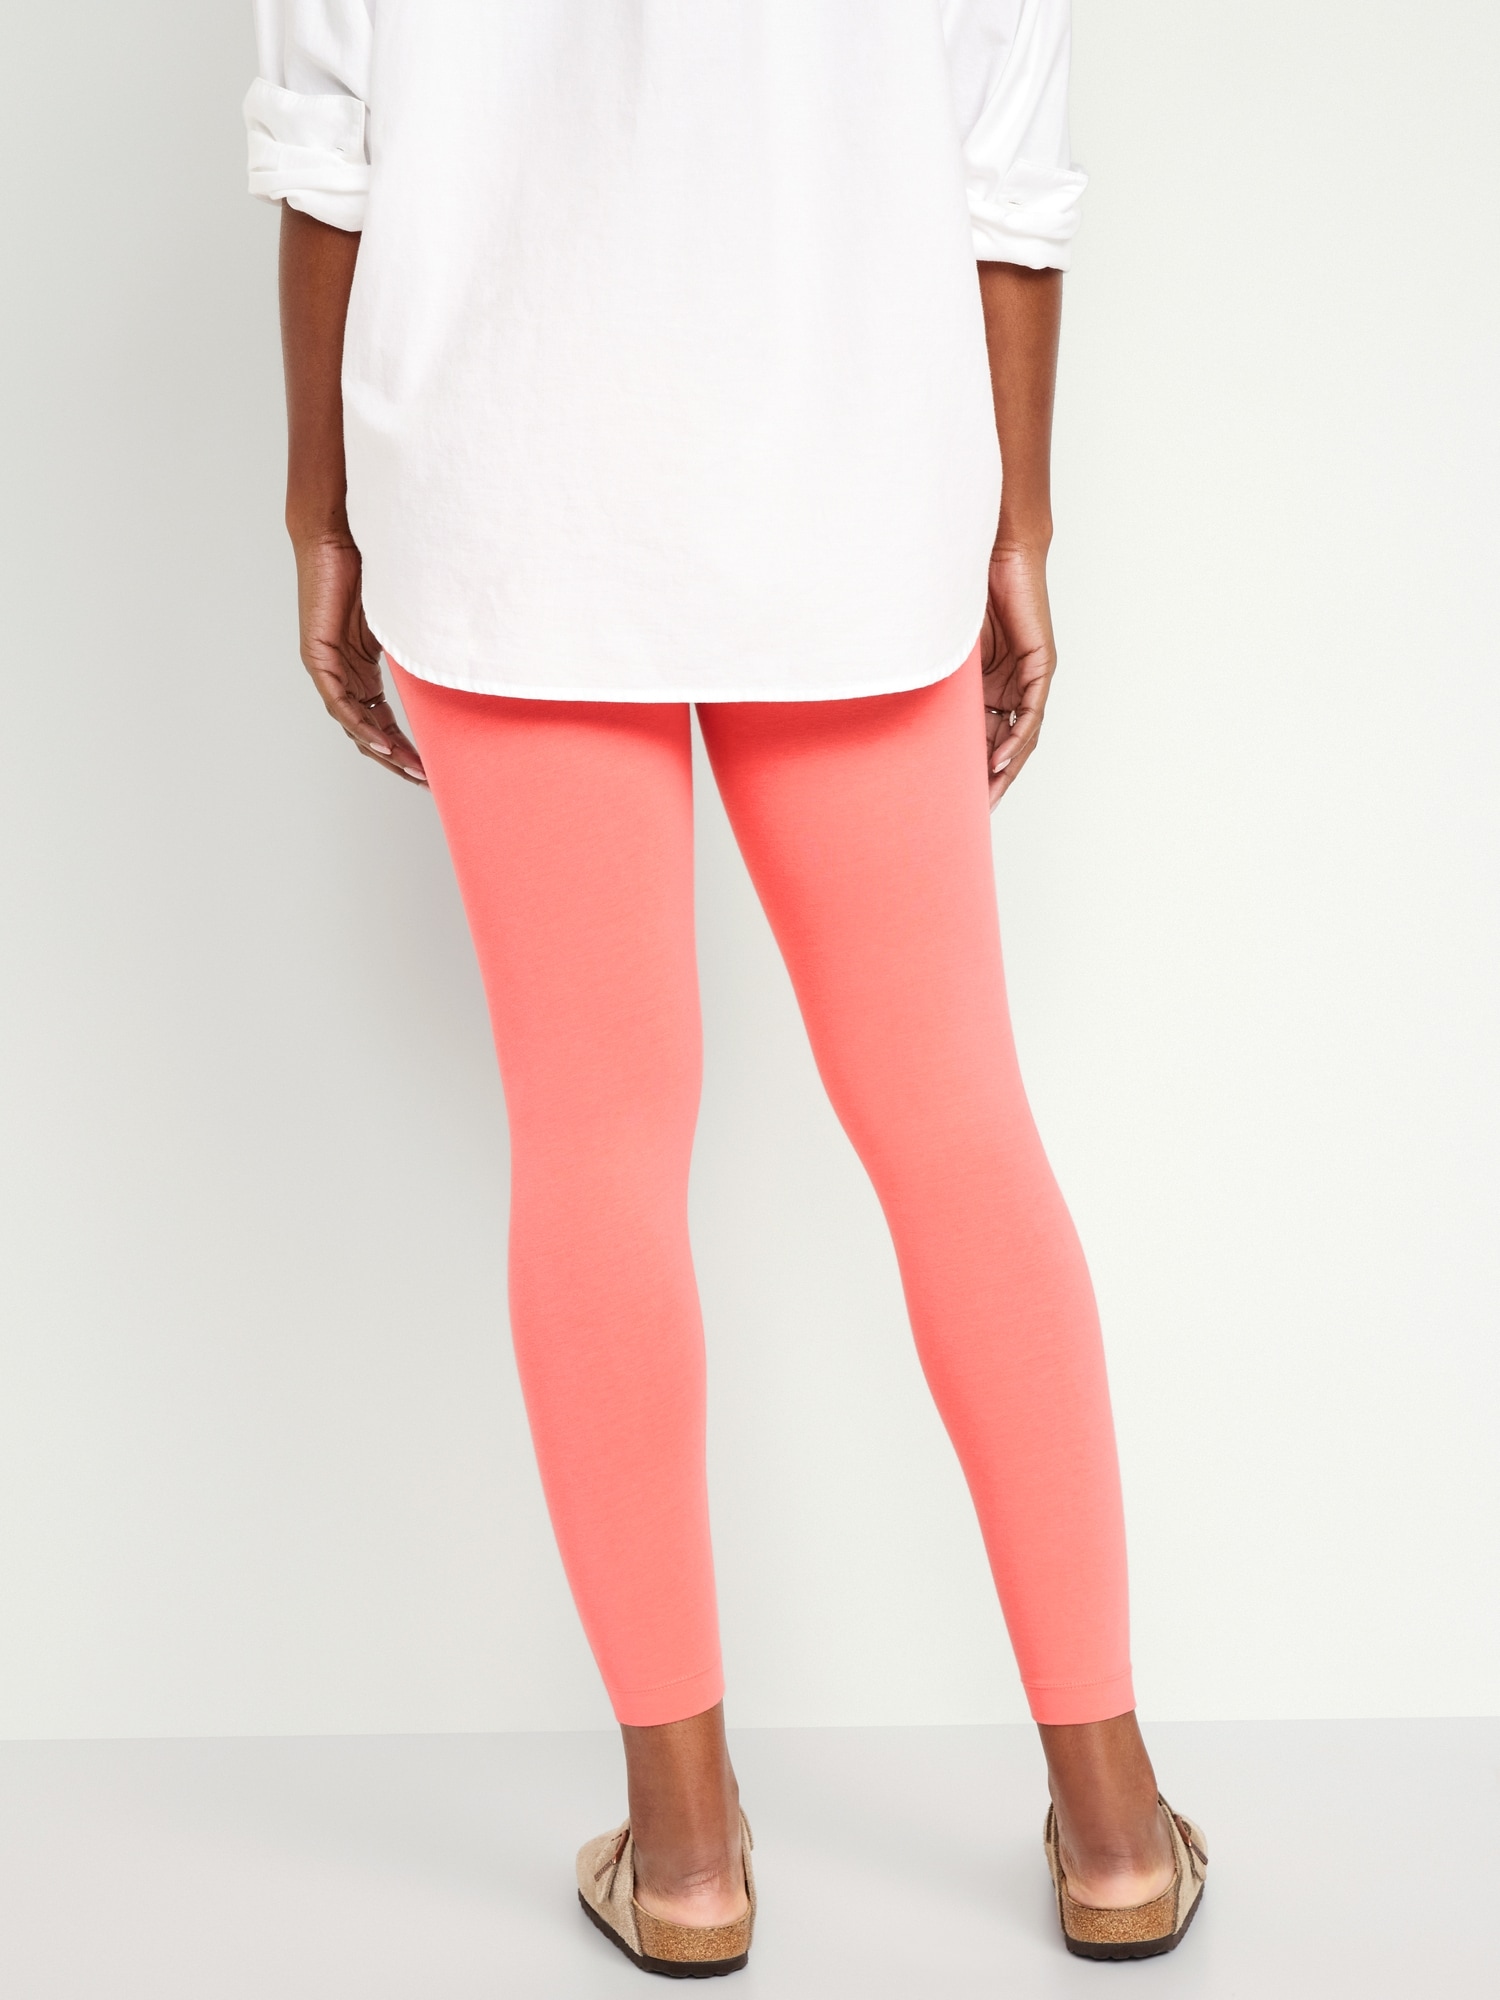 Buy Blue Cotton Jersey Lycra Tights Online - Shop for W